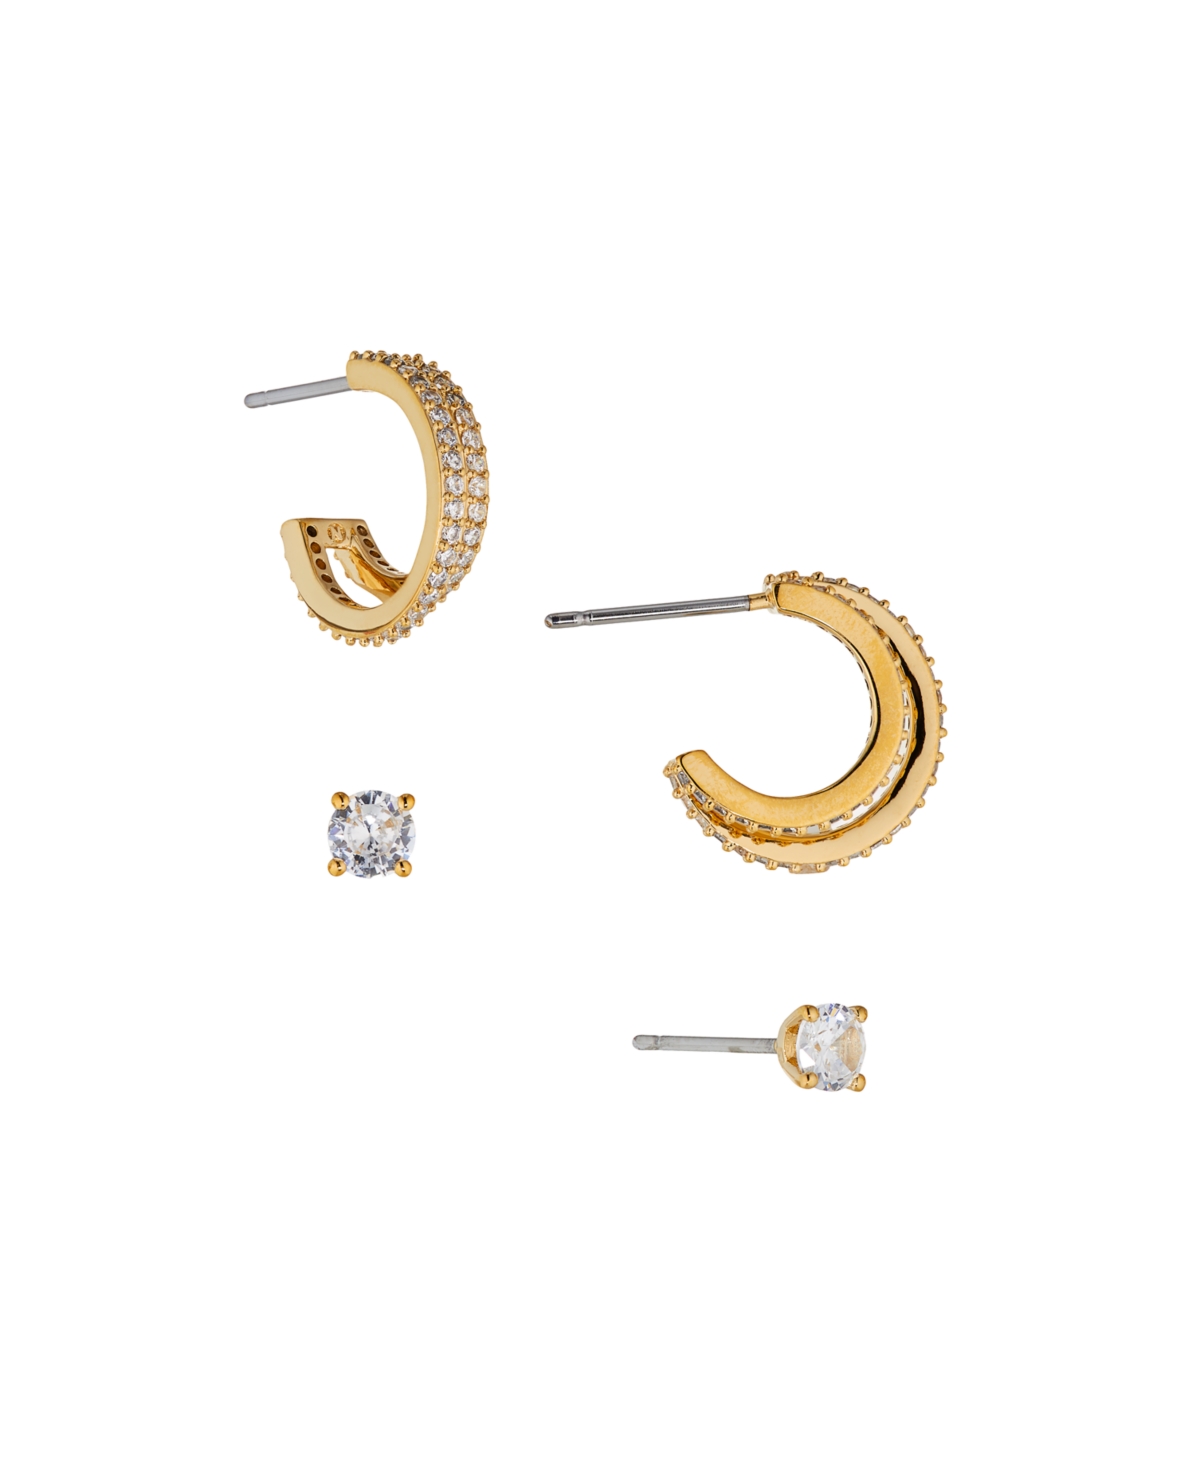 Small Hoop and Stud Earring in Silver-Tone Brass Set 4 Pieces - Silver-Tone